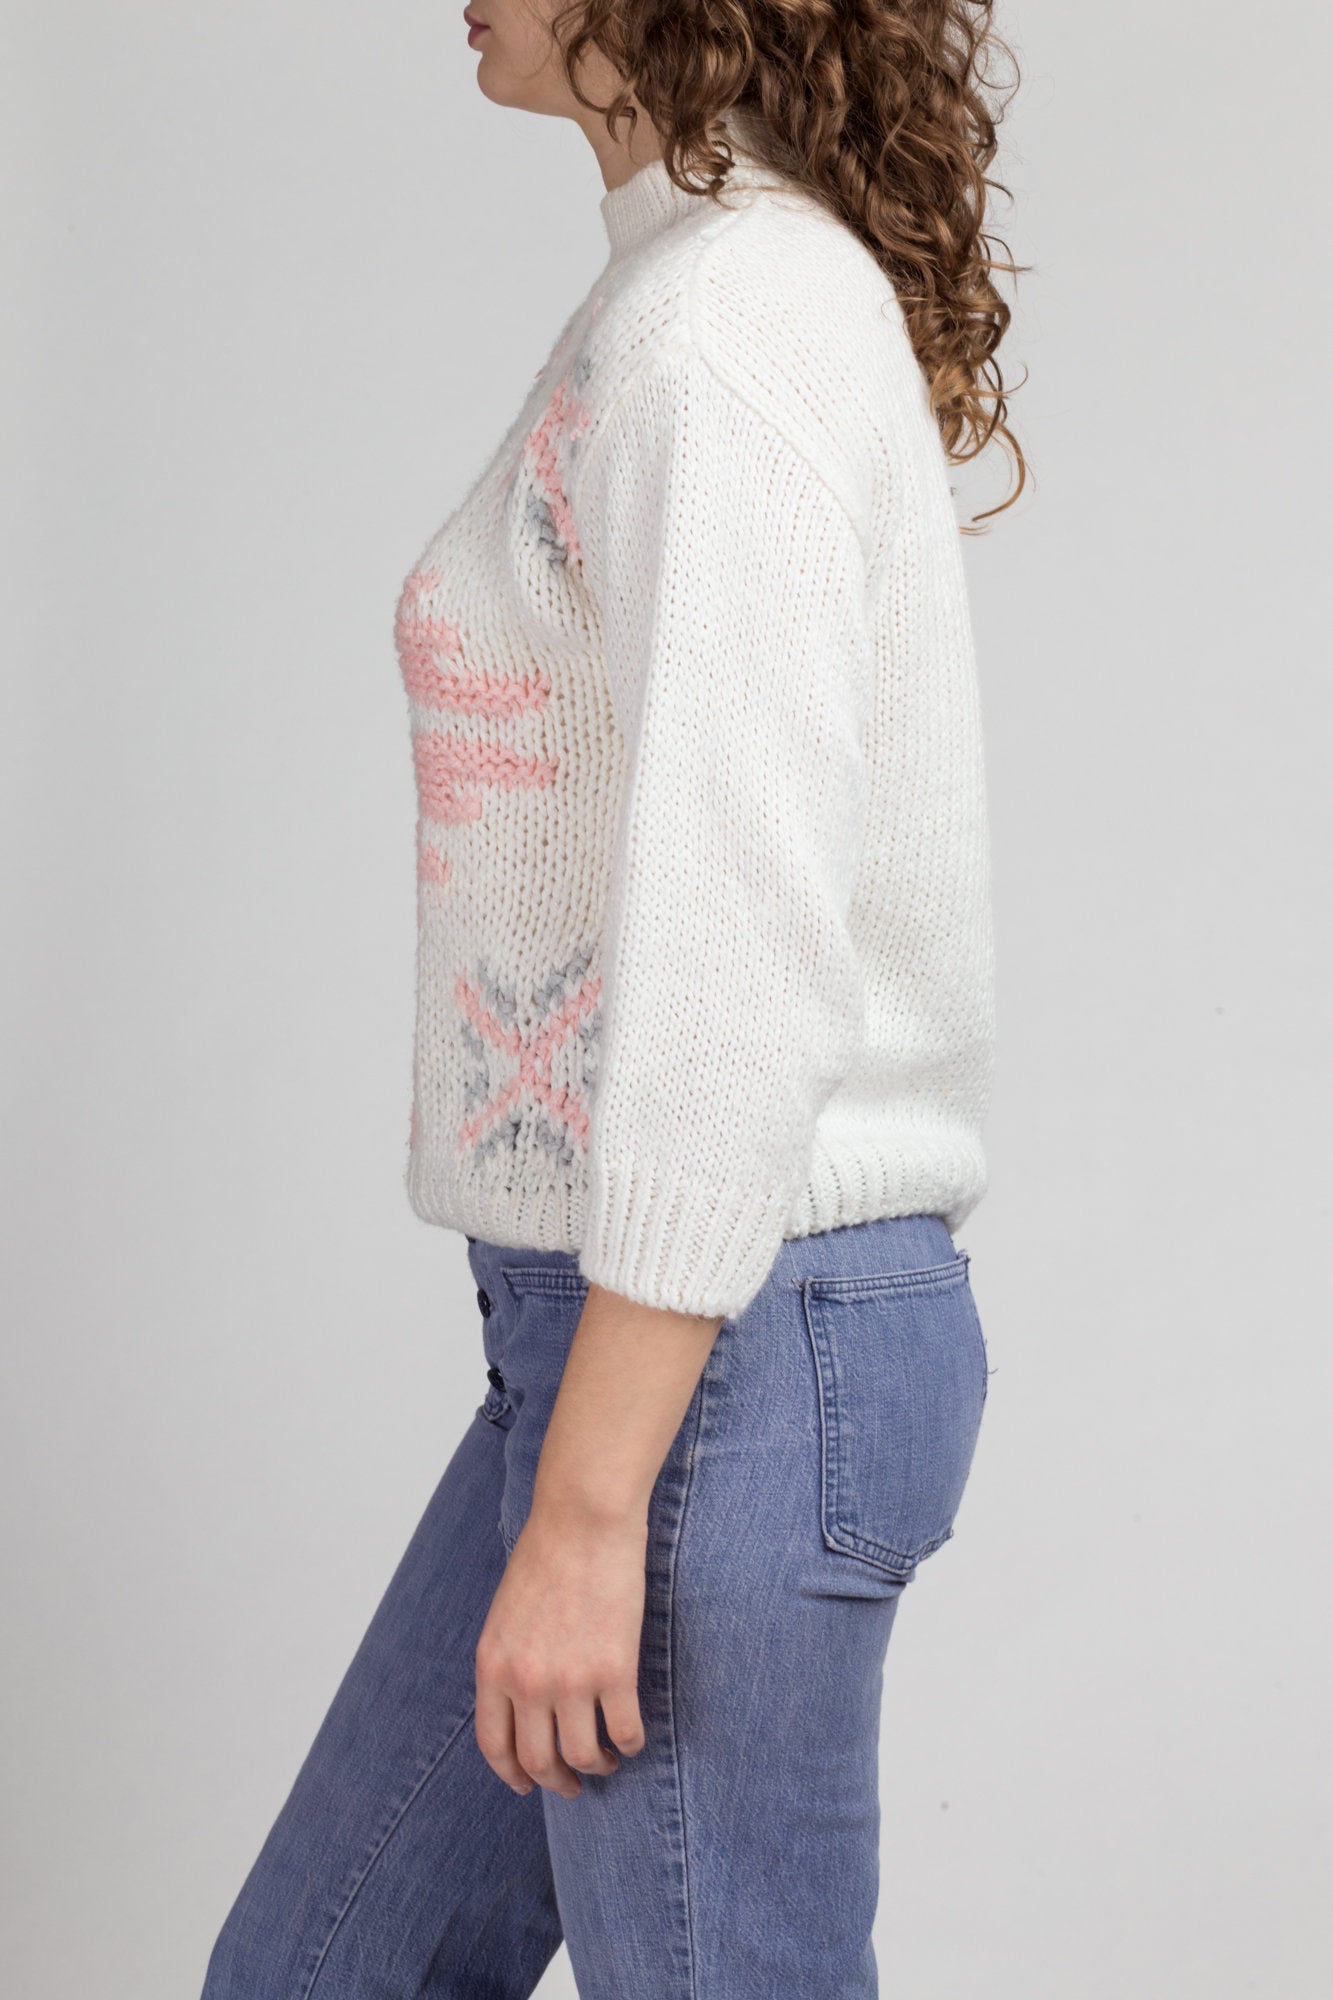 Vintage Girly Mockneck Cropped Knit Sweater - Petite Small | 80s Geometric Pink White Pullover Jumper Top